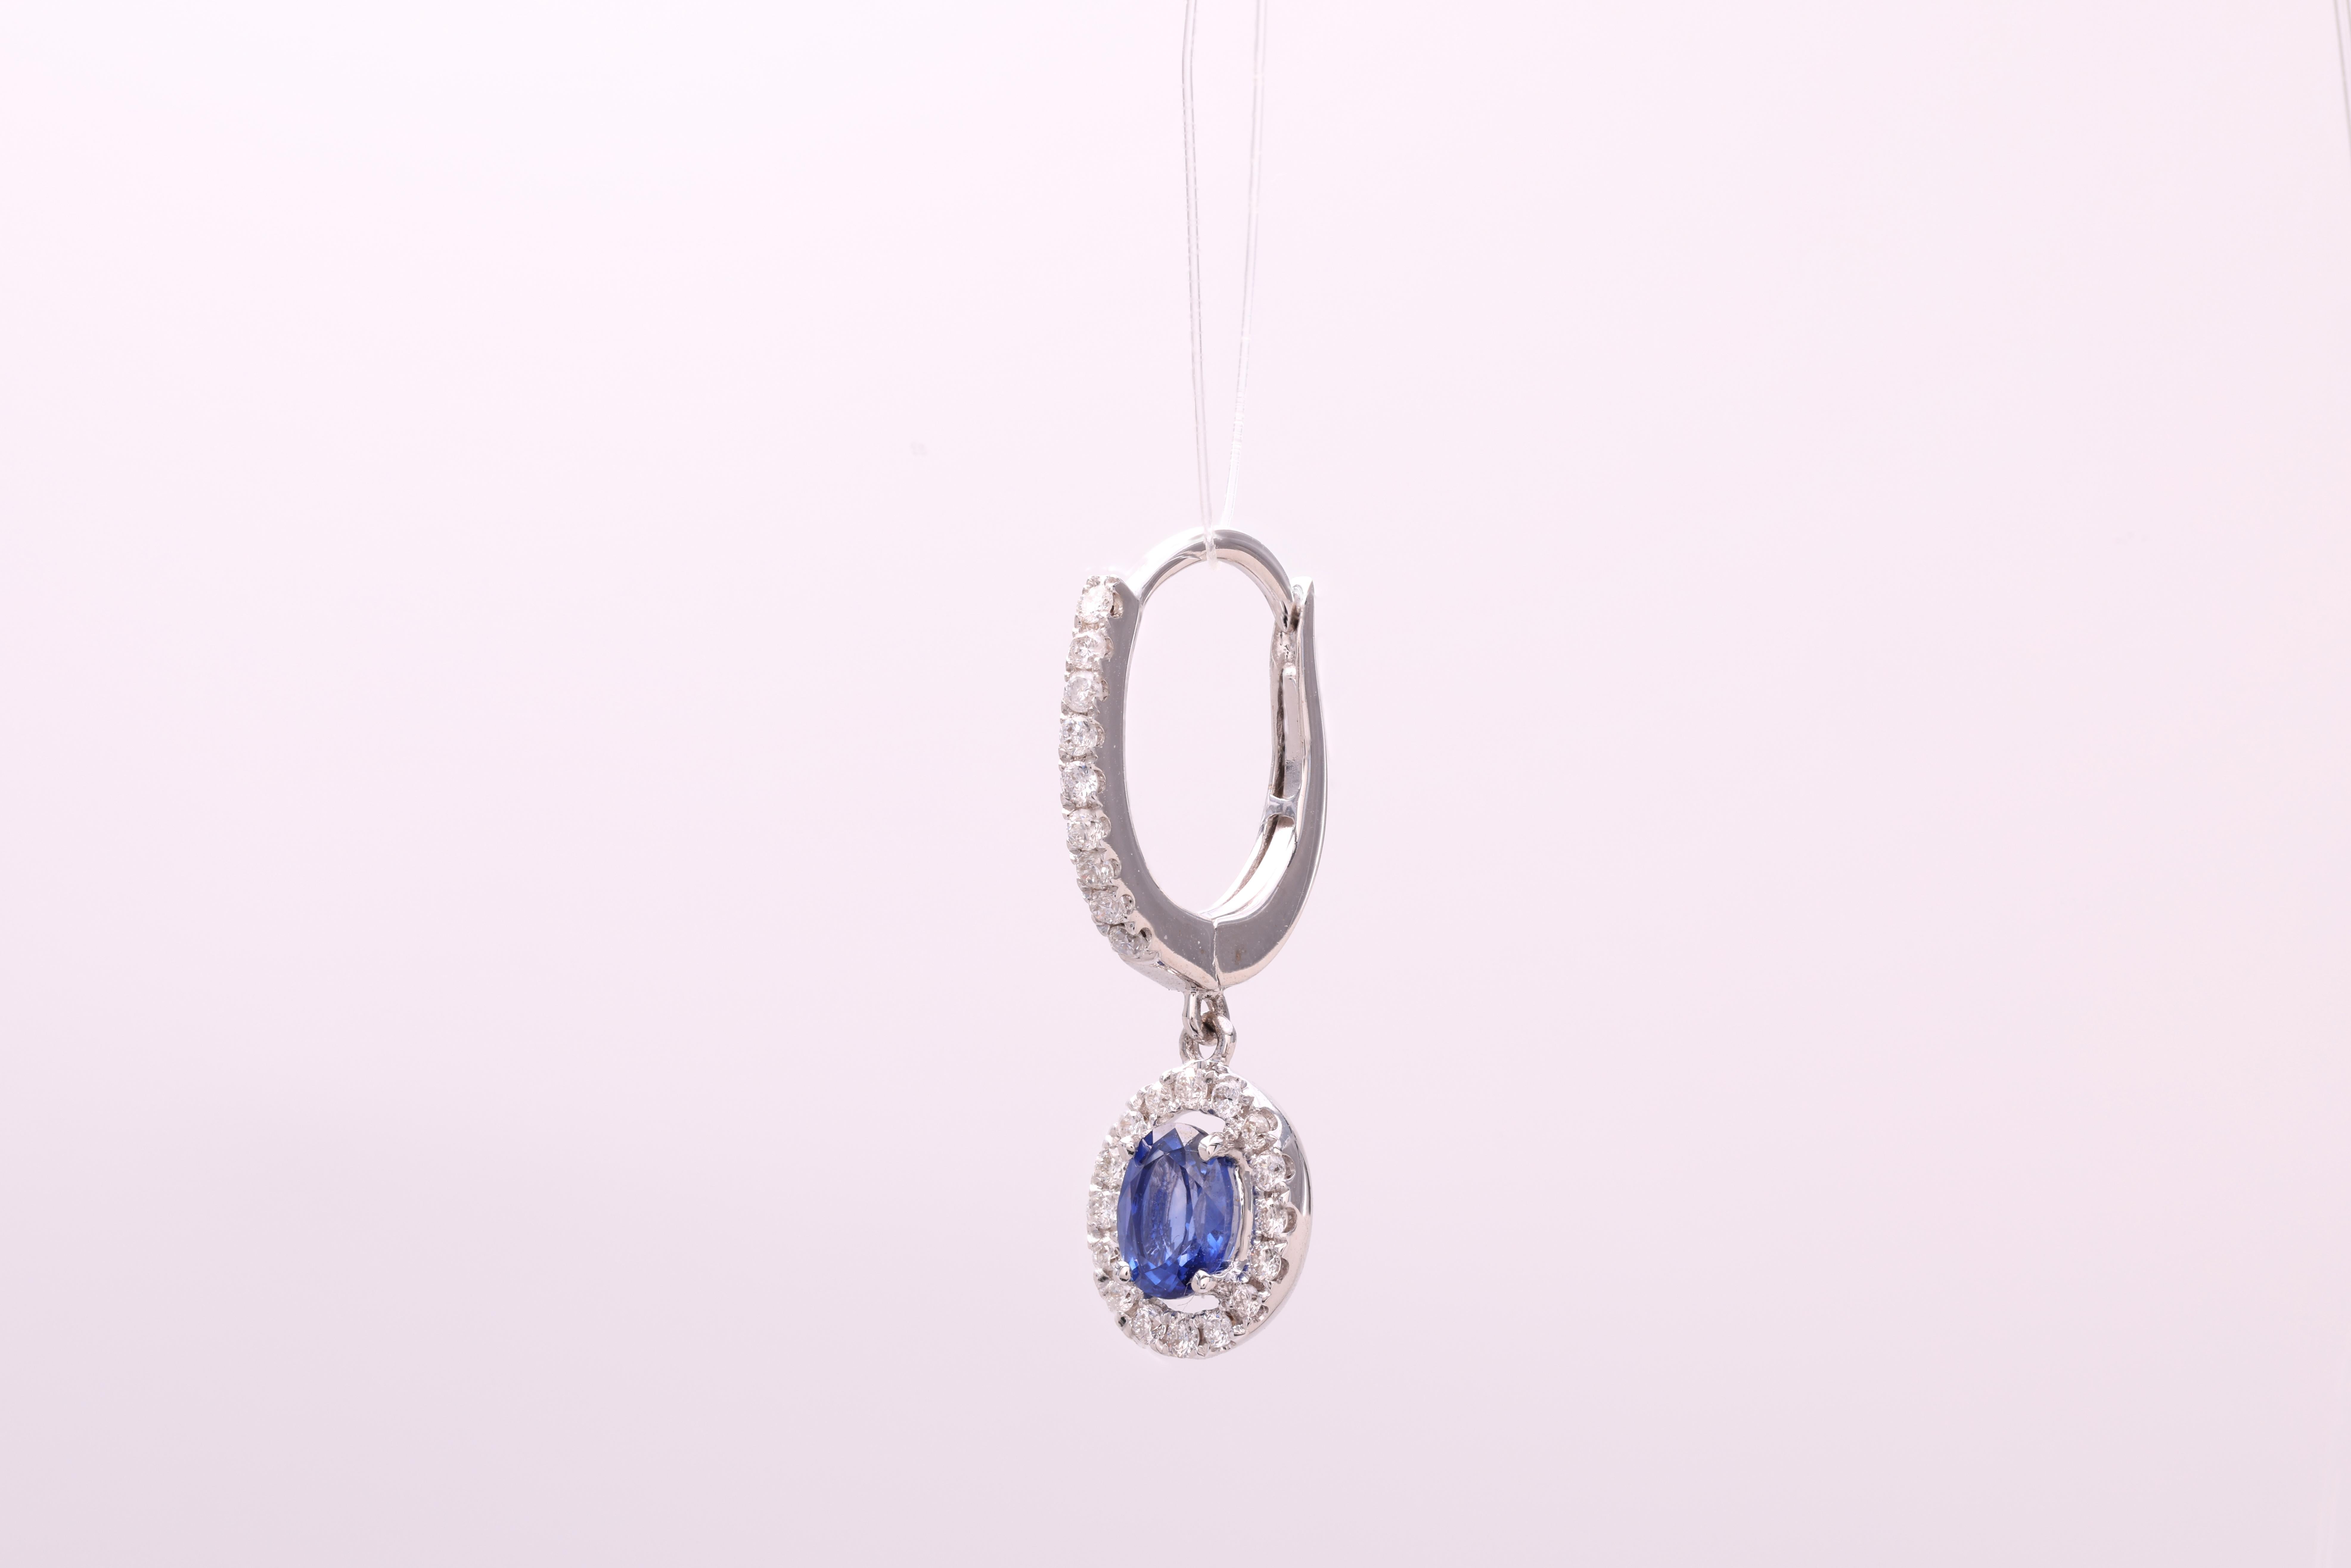 These stunning Halo Drop Sapphire earrings, showcasing an oval sapphire weighing 0.95 carats, elegantly accompanied by 0.33 carats of round, natural diamonds. The sapphire body of the earring dangles delicately from an embellished leverback